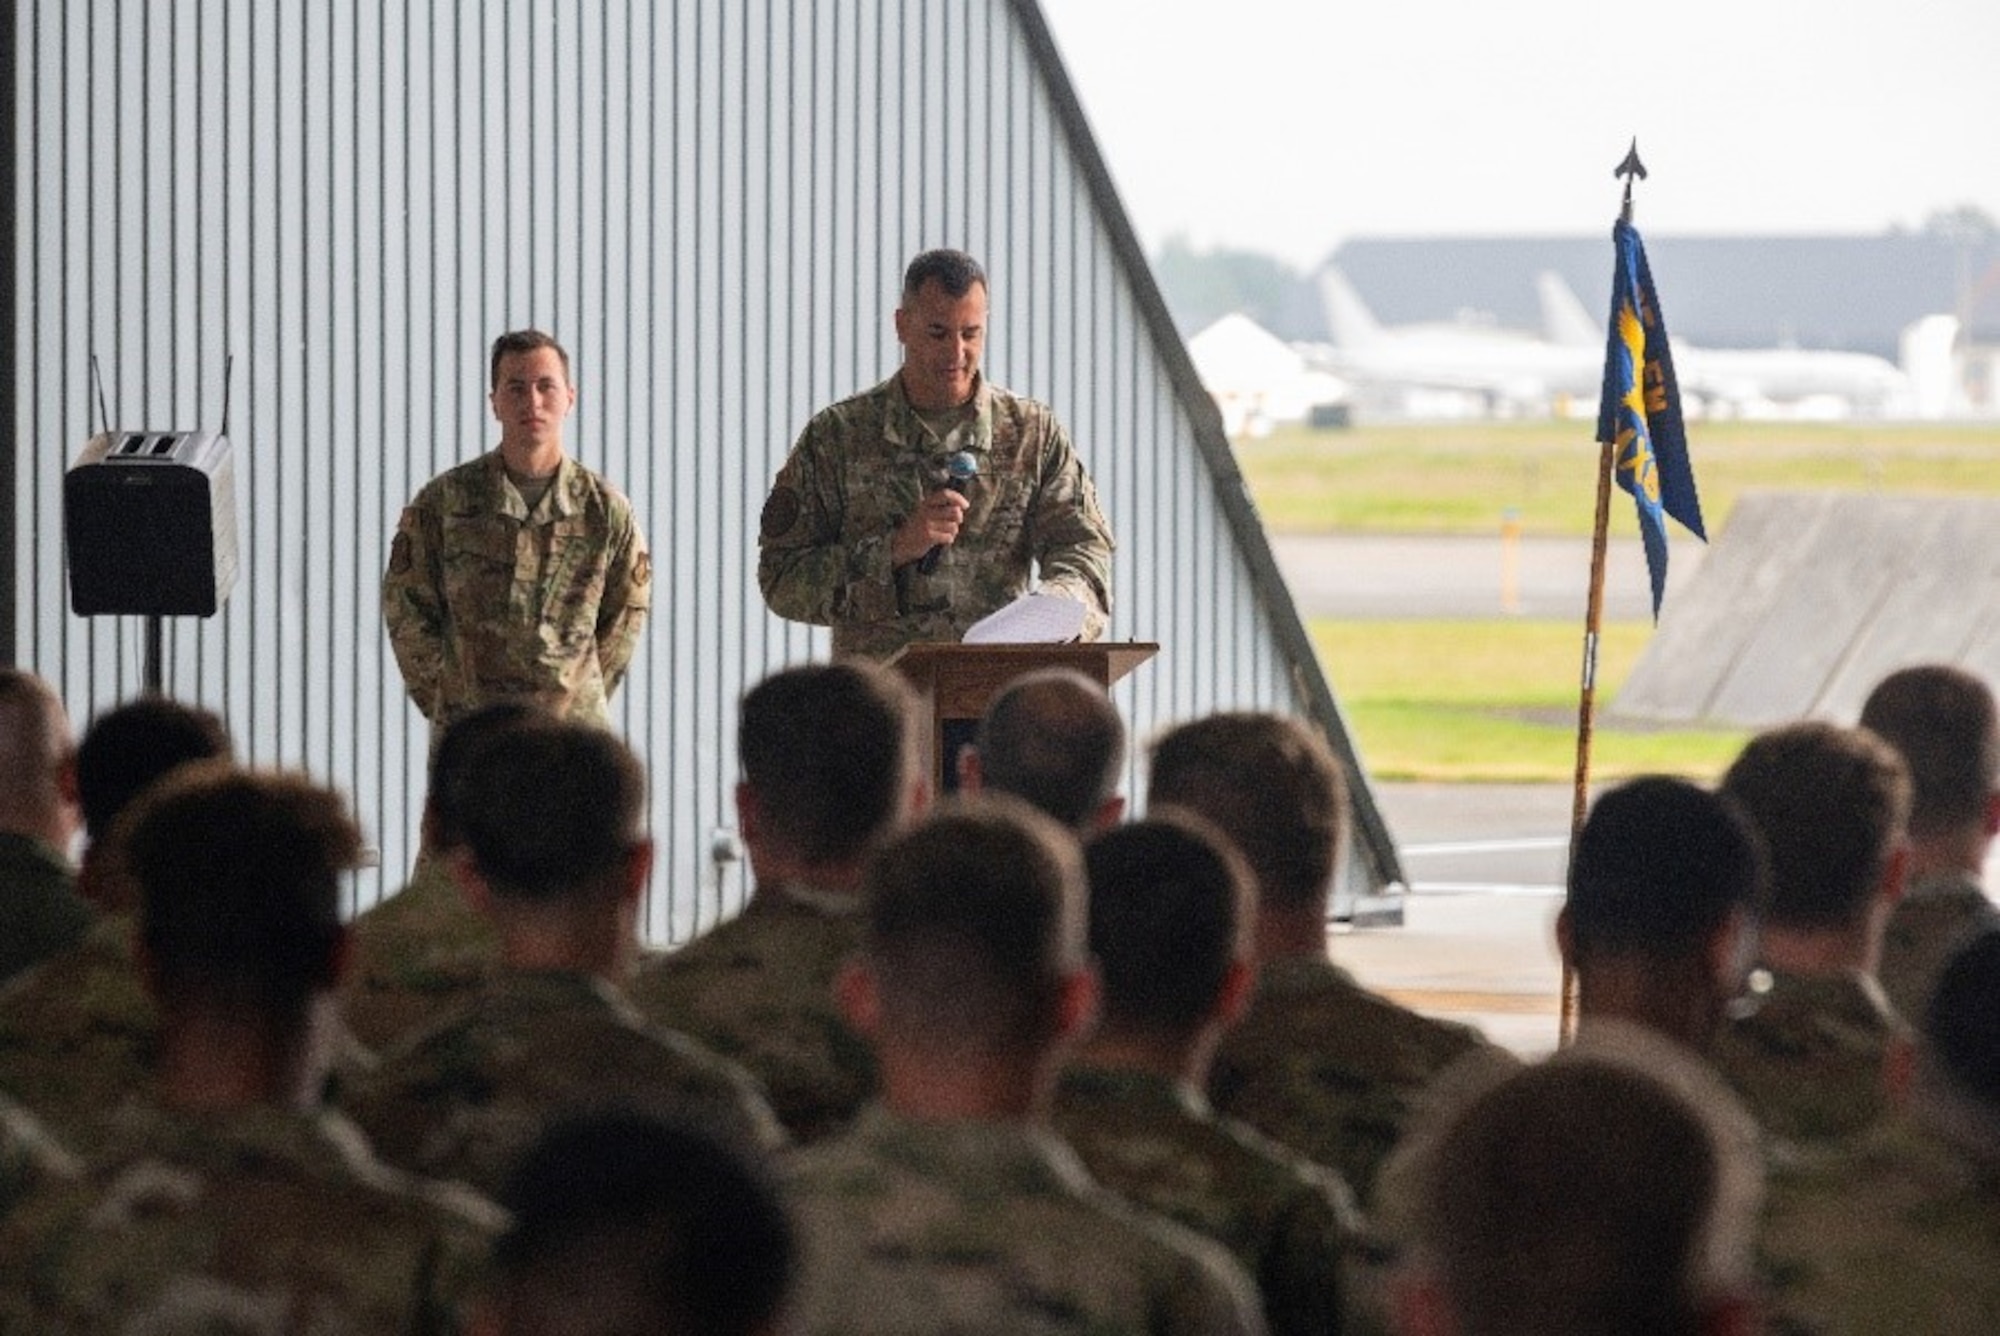 Military member address a hangar full of people during a ceremony.